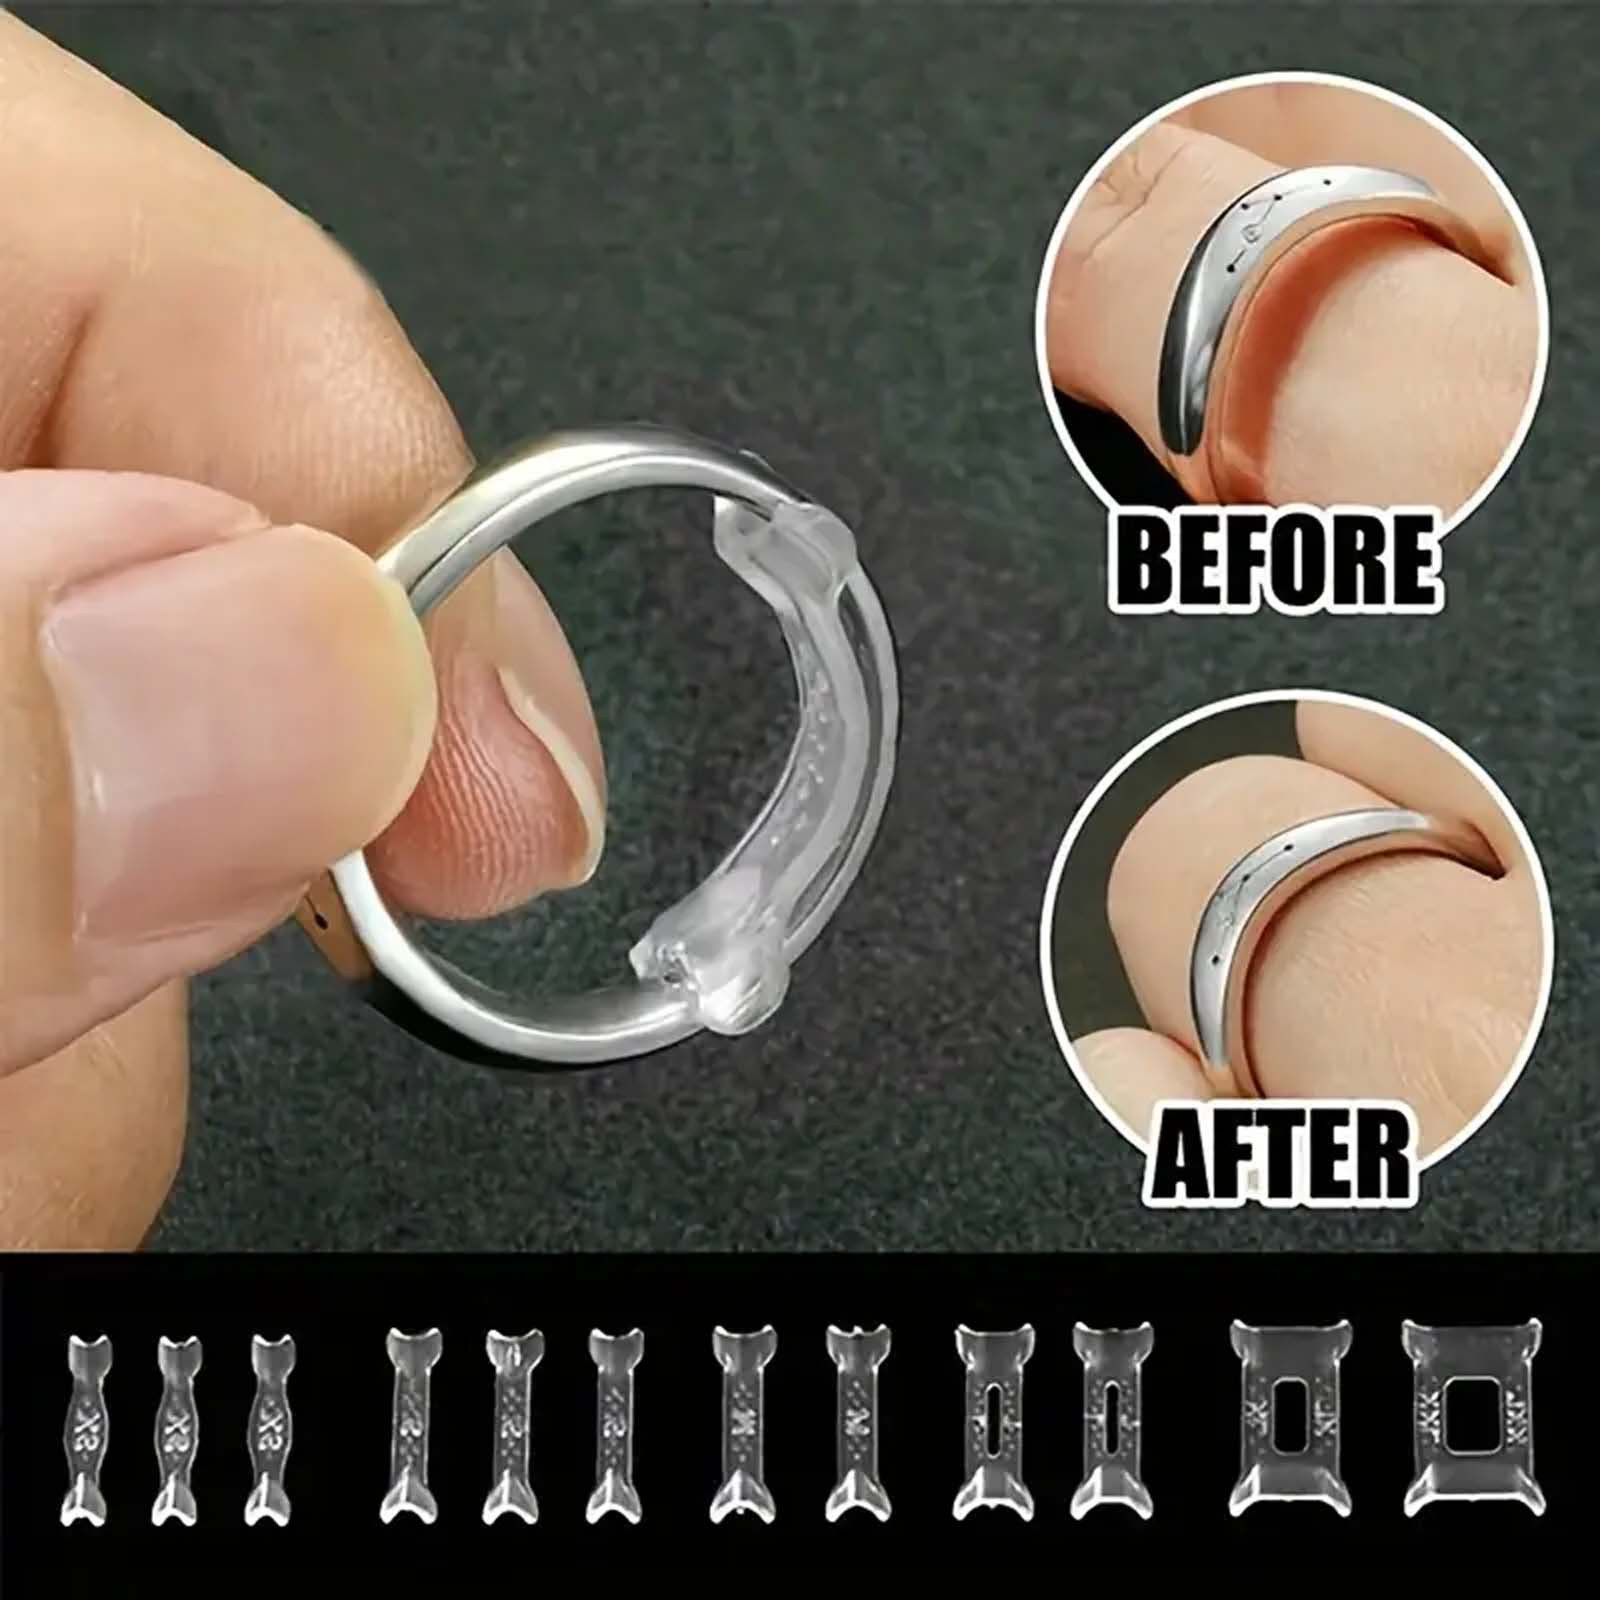 6 Pcs size reducer for Ring Guard Clear Ring Sizer Ring Resizer Tool